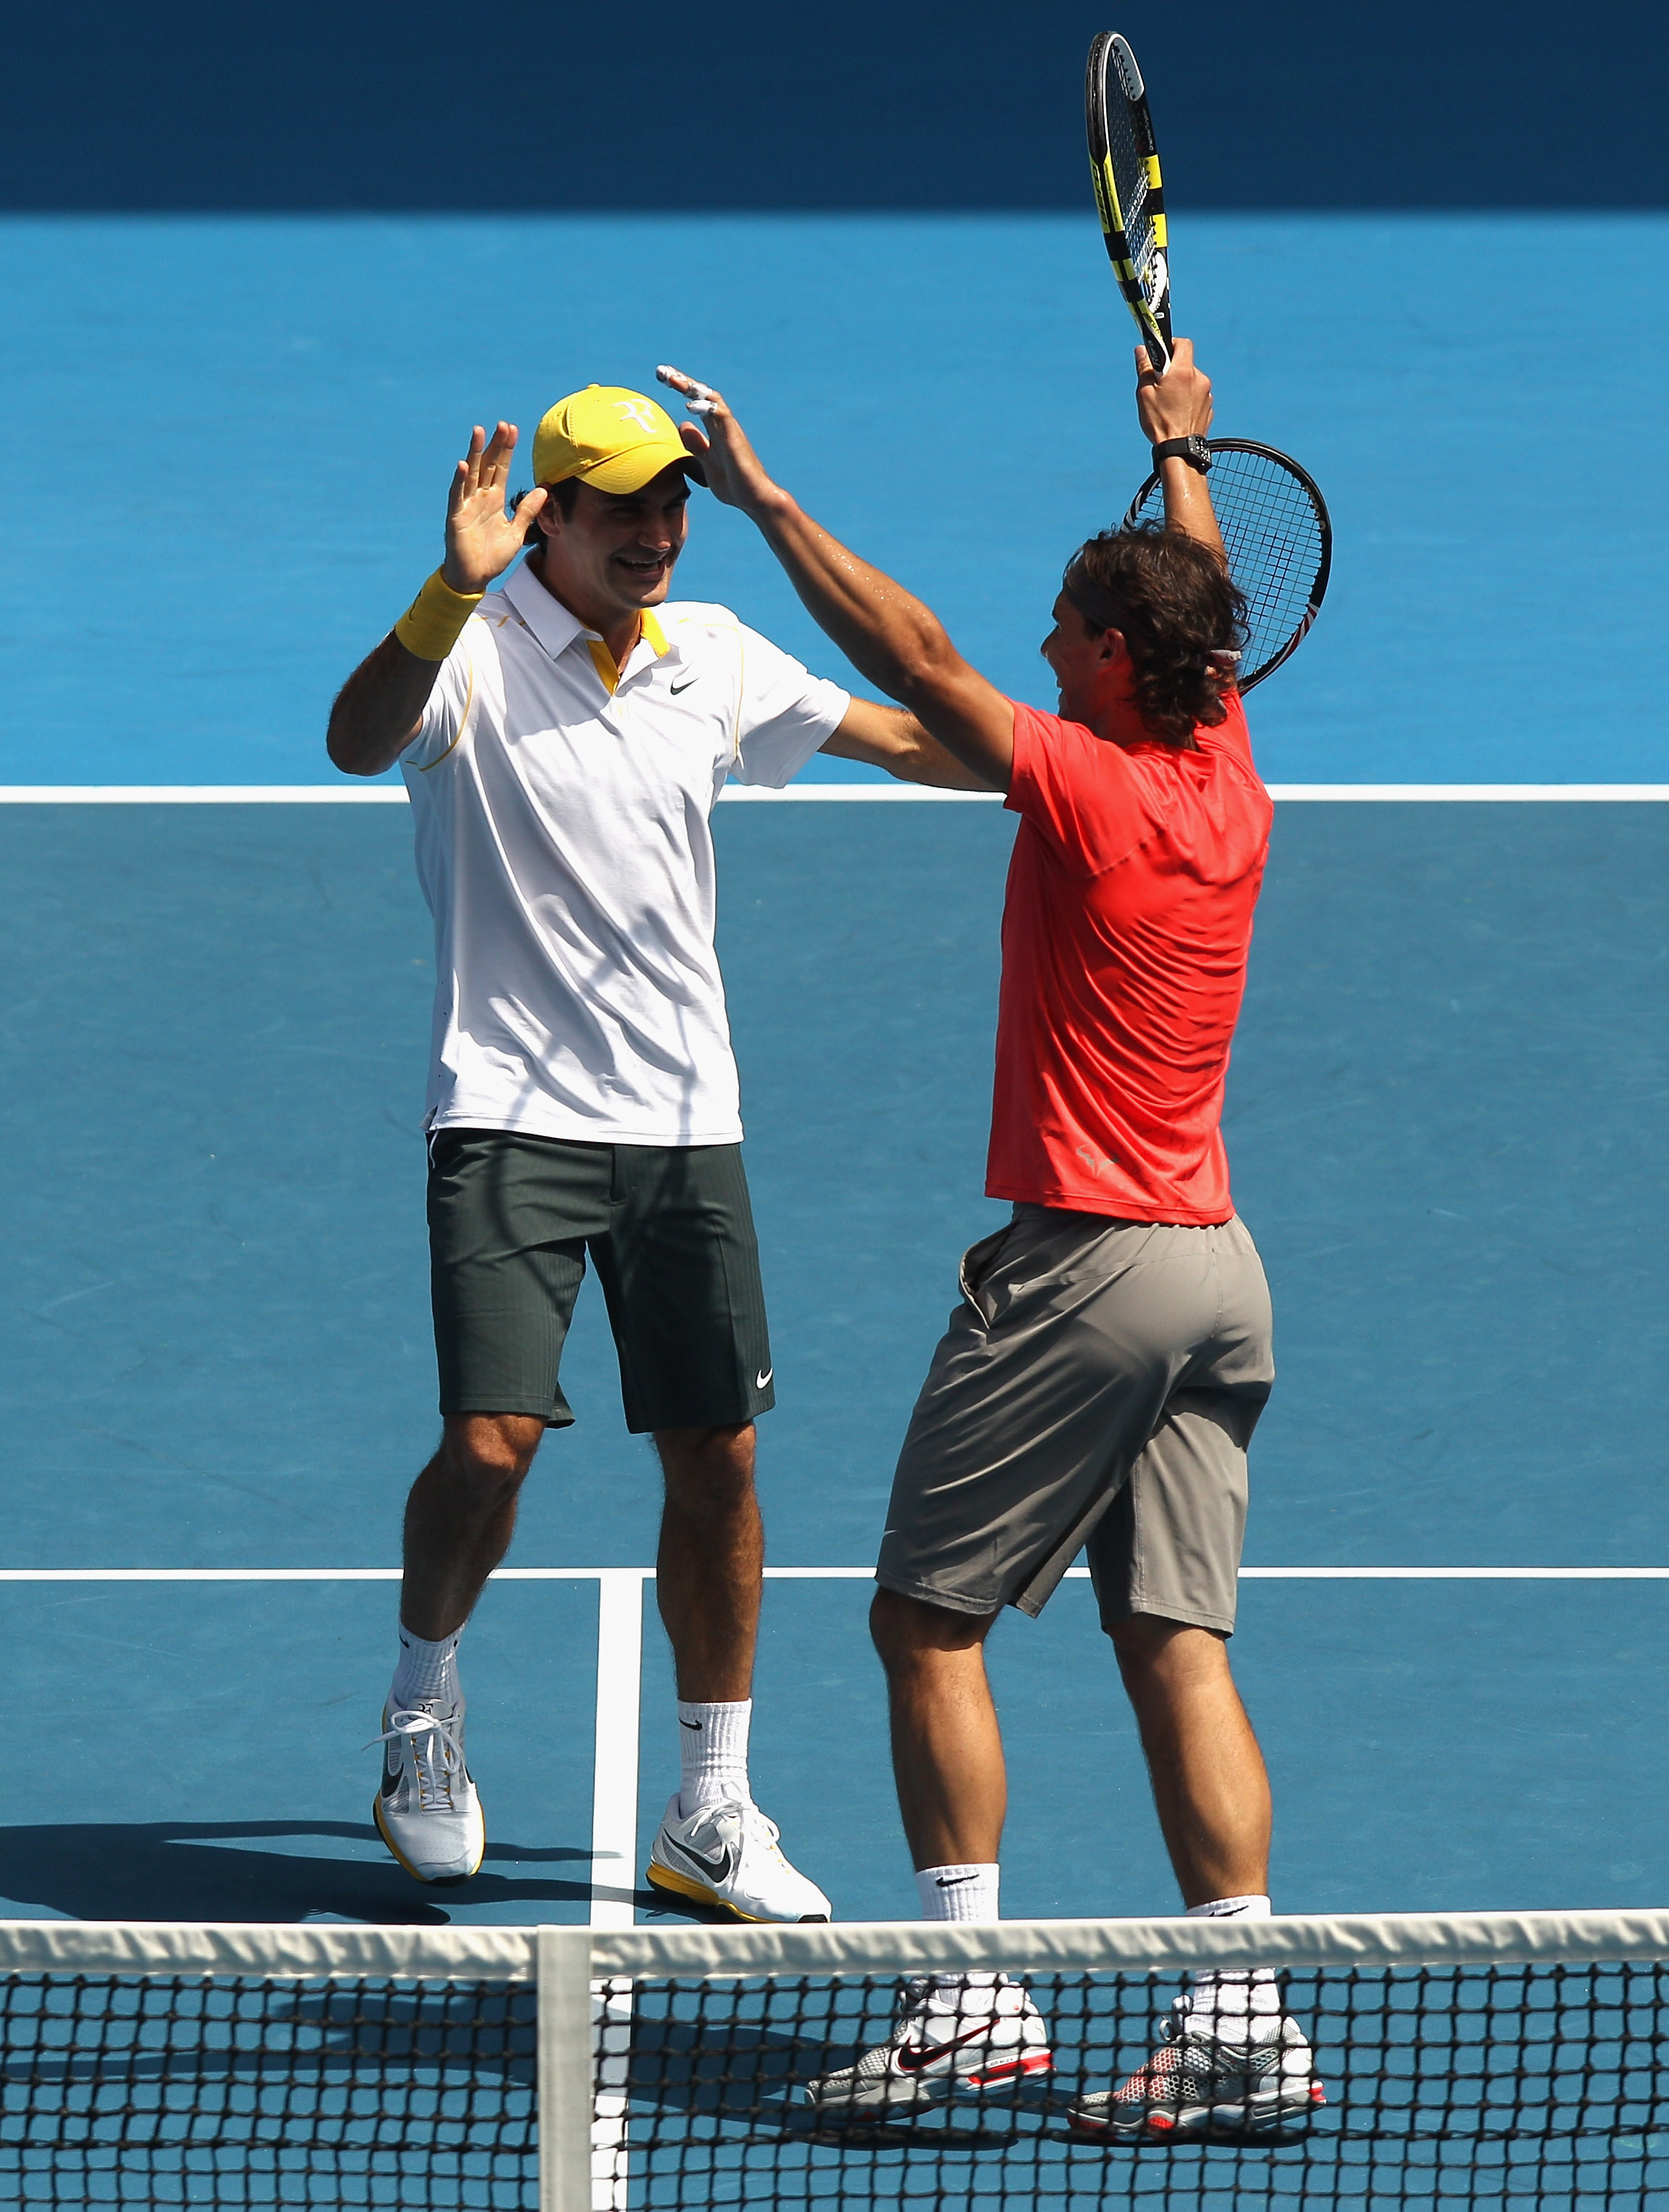 Australian Open 2011: Marking The Rivalry Between Nadal and Federer Bleacher Report | Latest News, Videos and Highlights